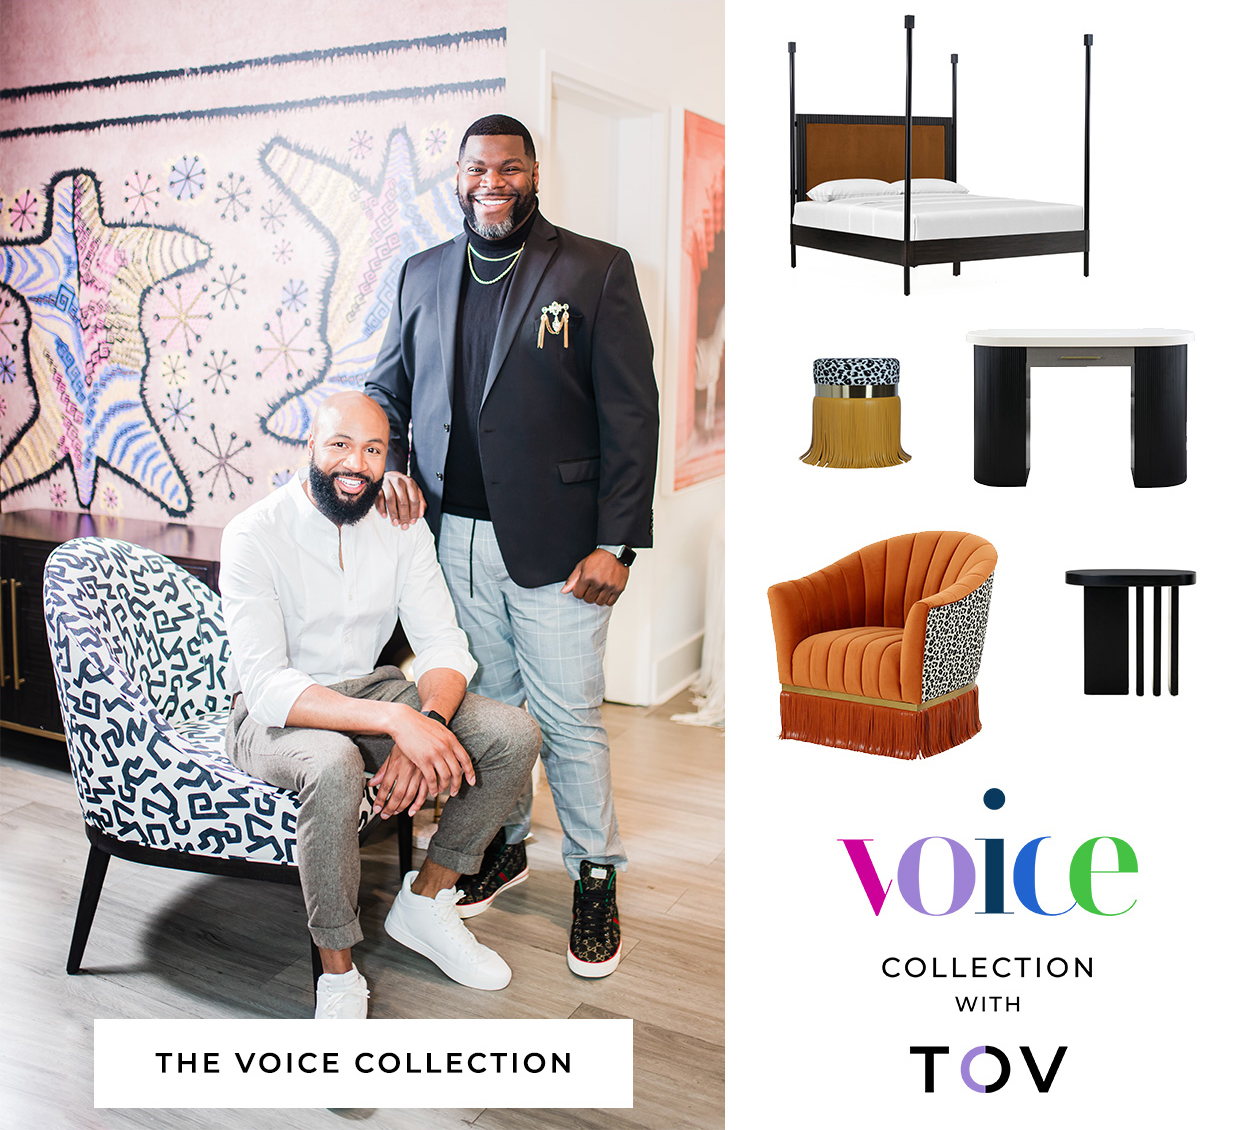 The Voice Collection by TOV